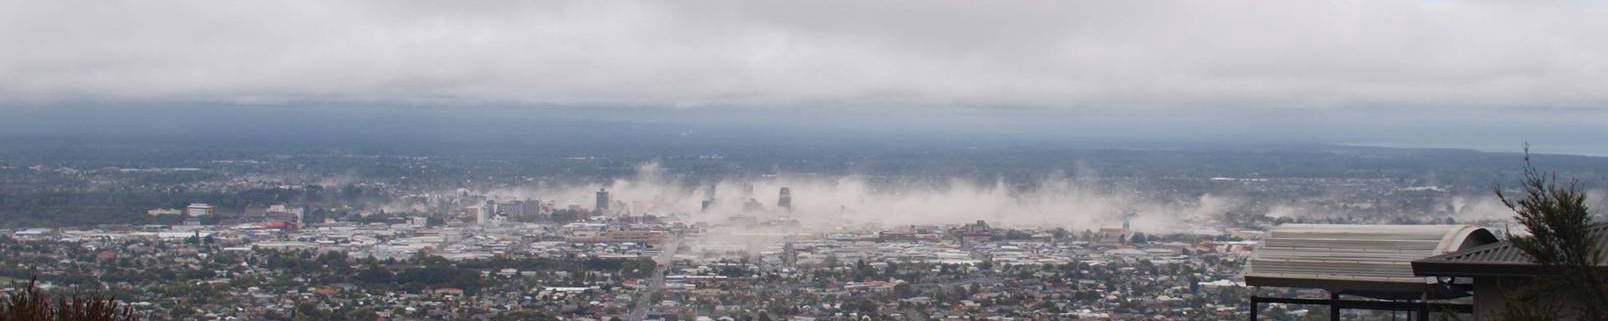 A view of the Christchurch city skyline, with large clouds of dust obscuring the central areas.